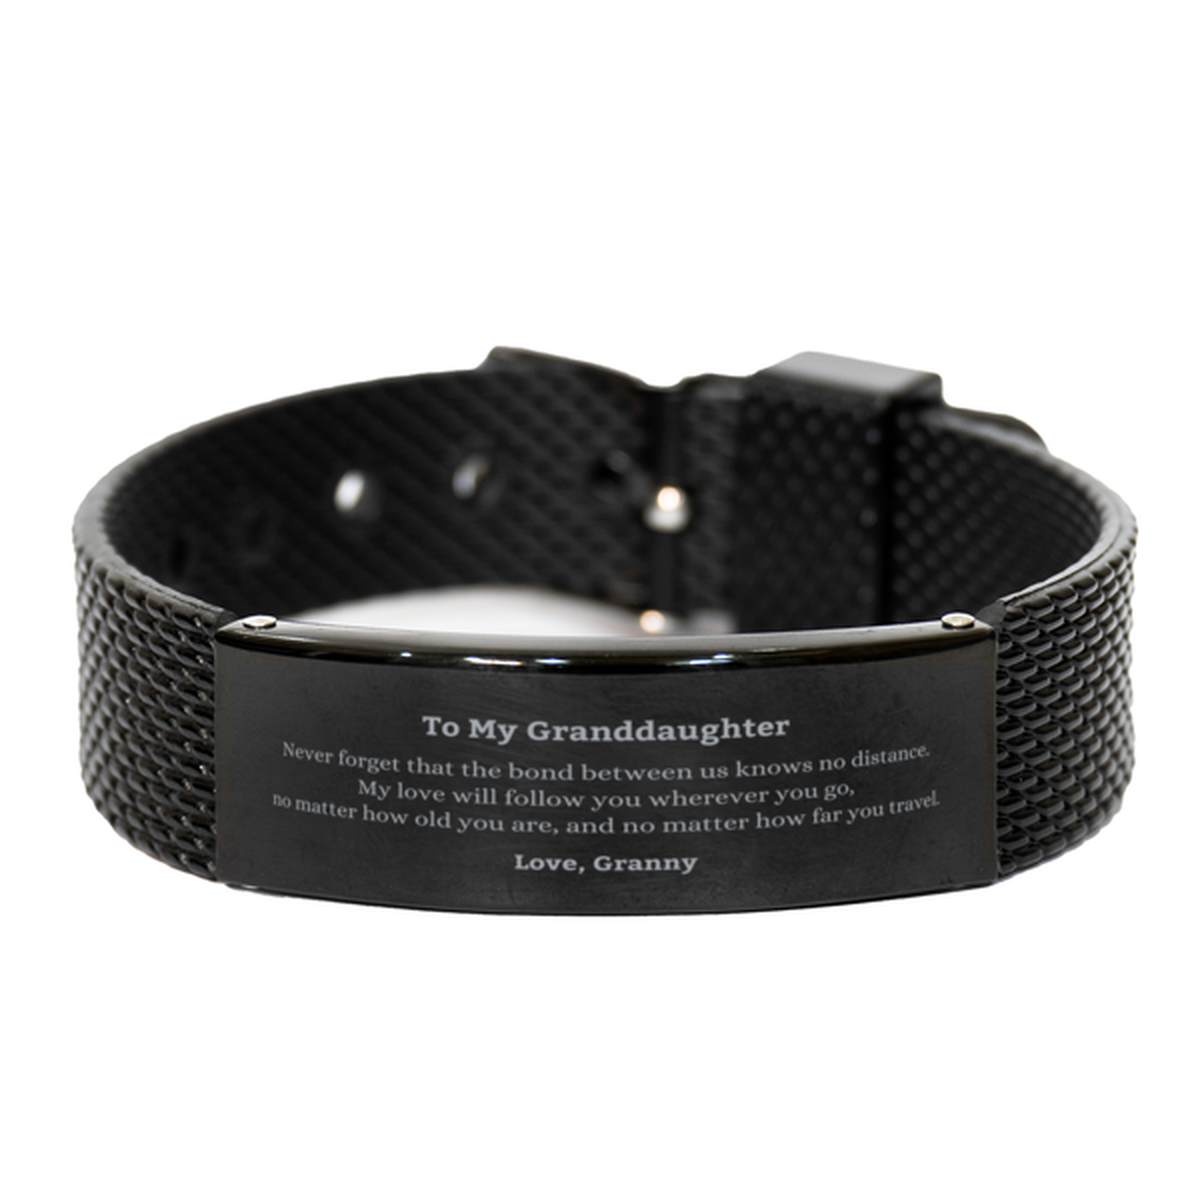 Granddaughter Birthday Gifts from Granny, Adjustable Black Shark Mesh Bracelet for Granddaughter Christmas Graduation Unique Gifts Granddaughter Never forget that the bond between us knows no distance. Love, Granny